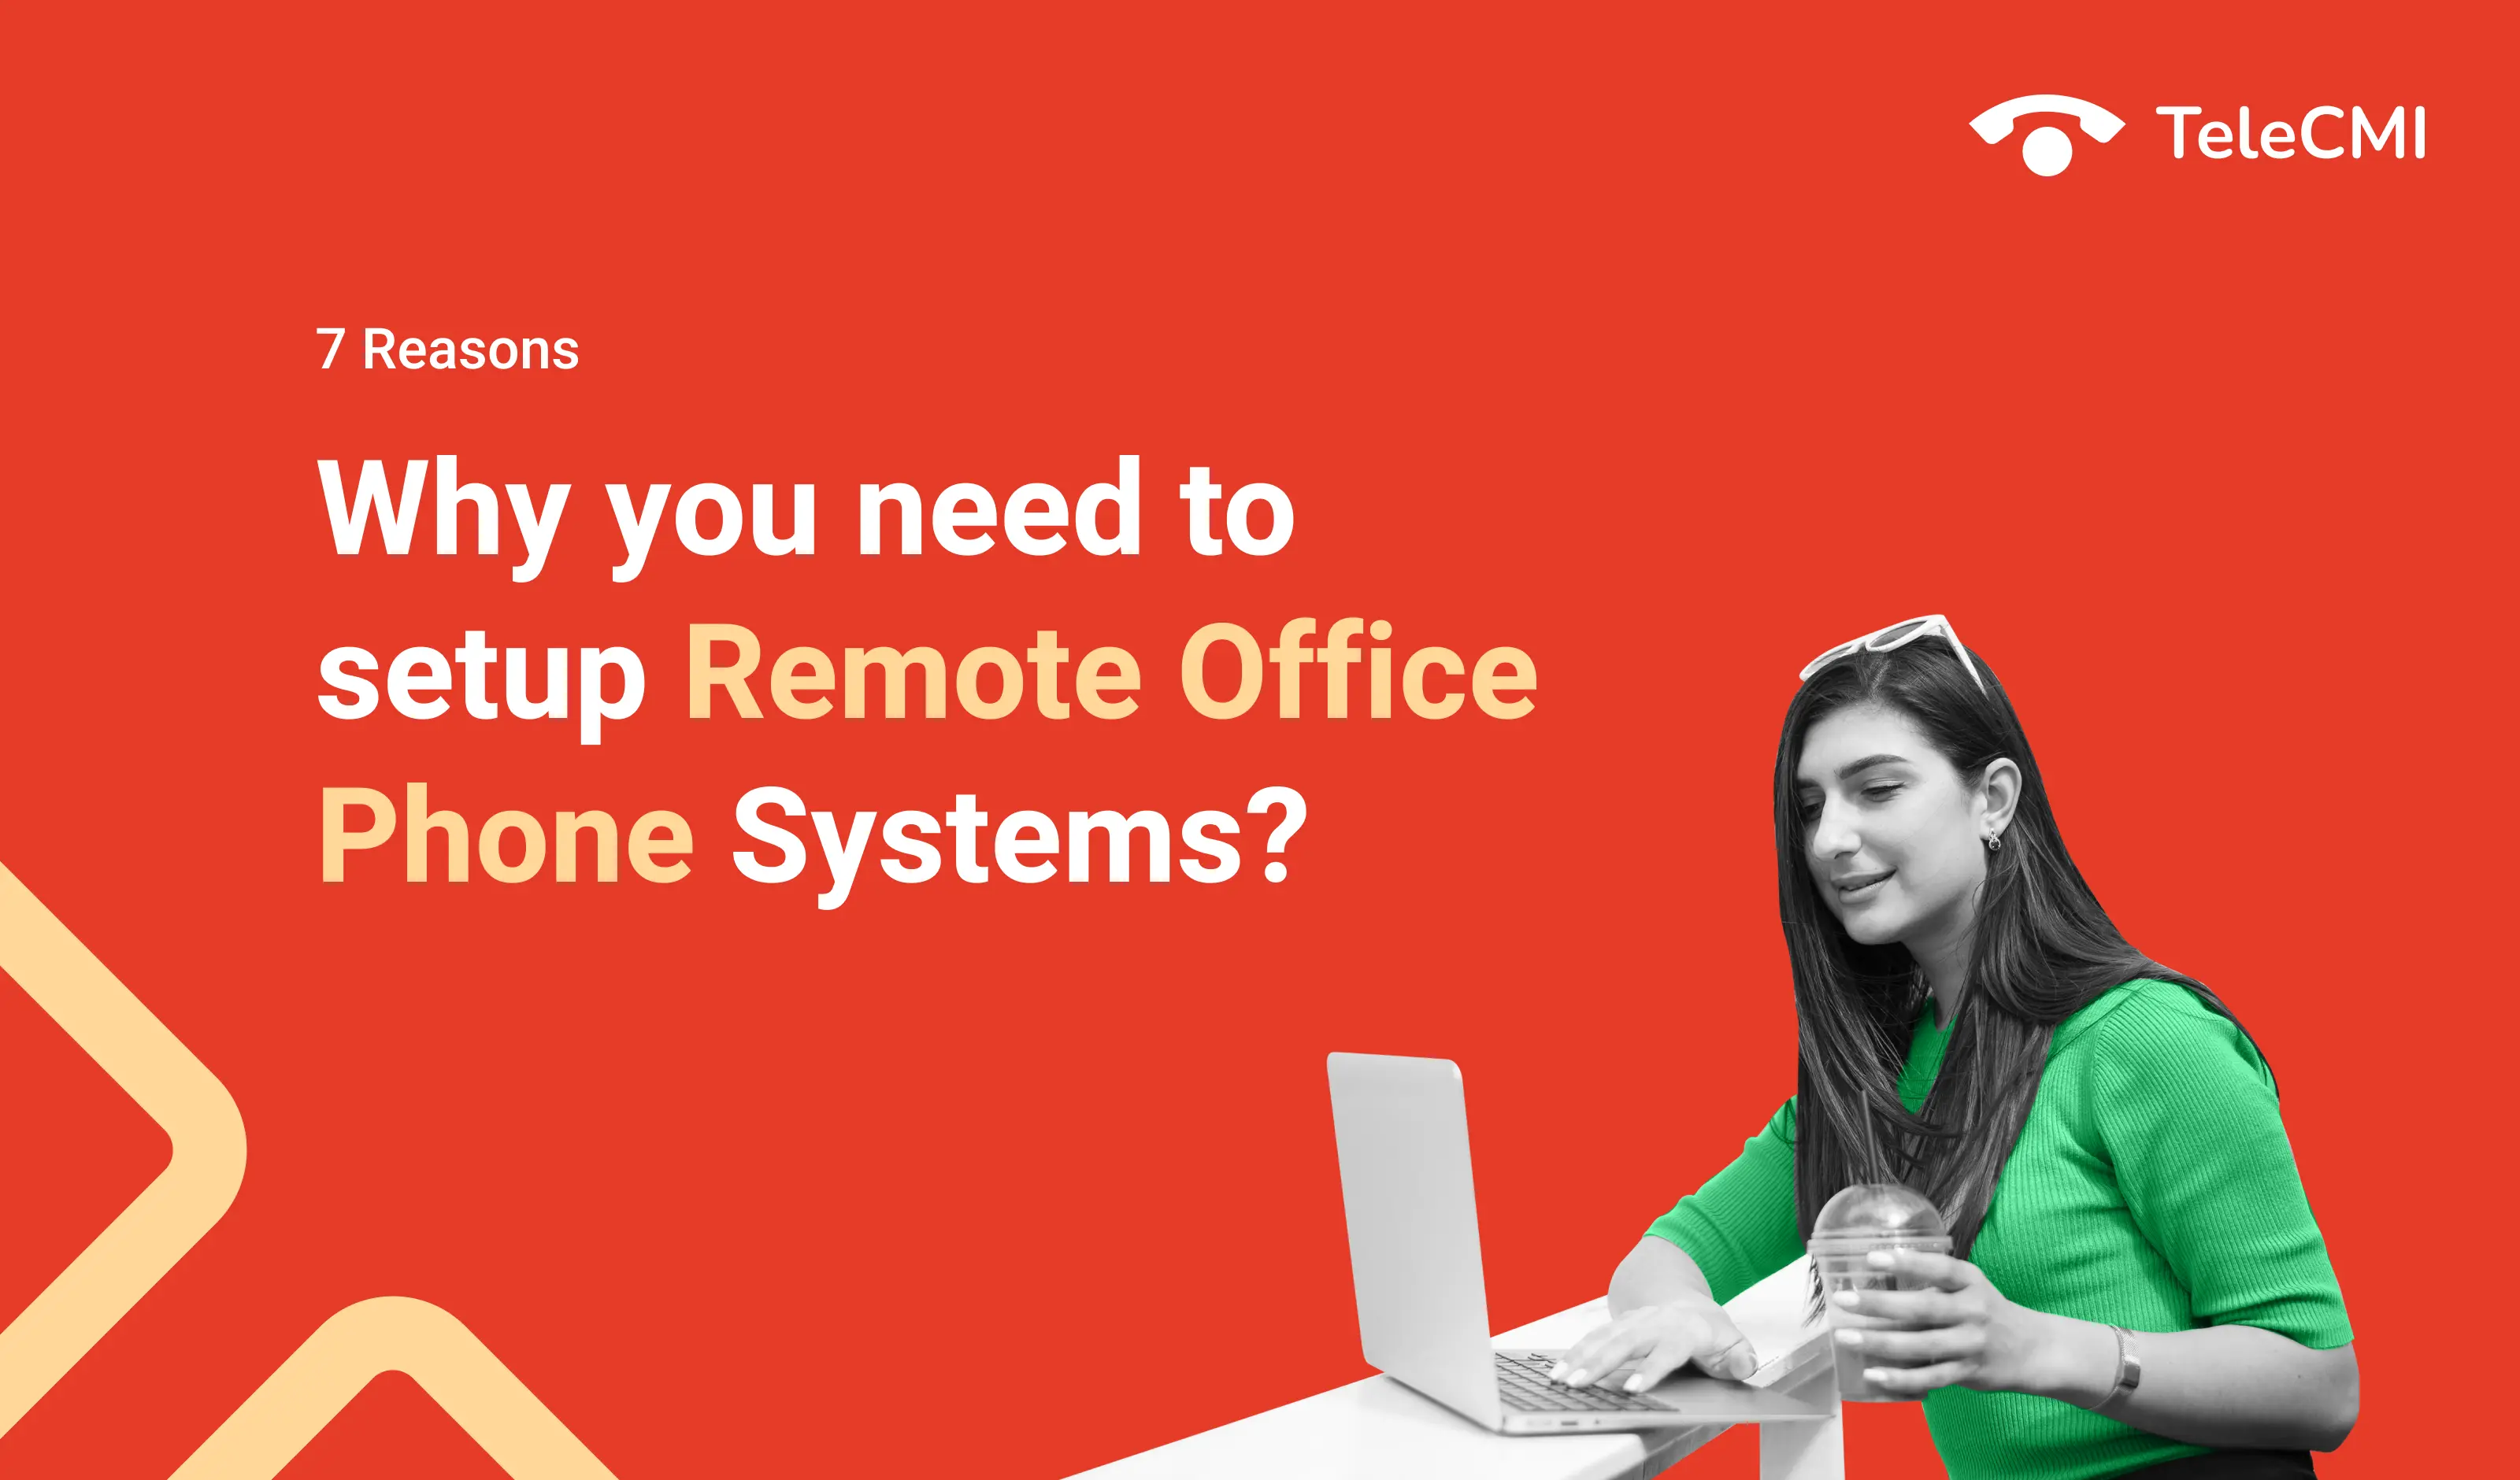 7 Reasons why you need to setup Remote Office Phone Systems for your business